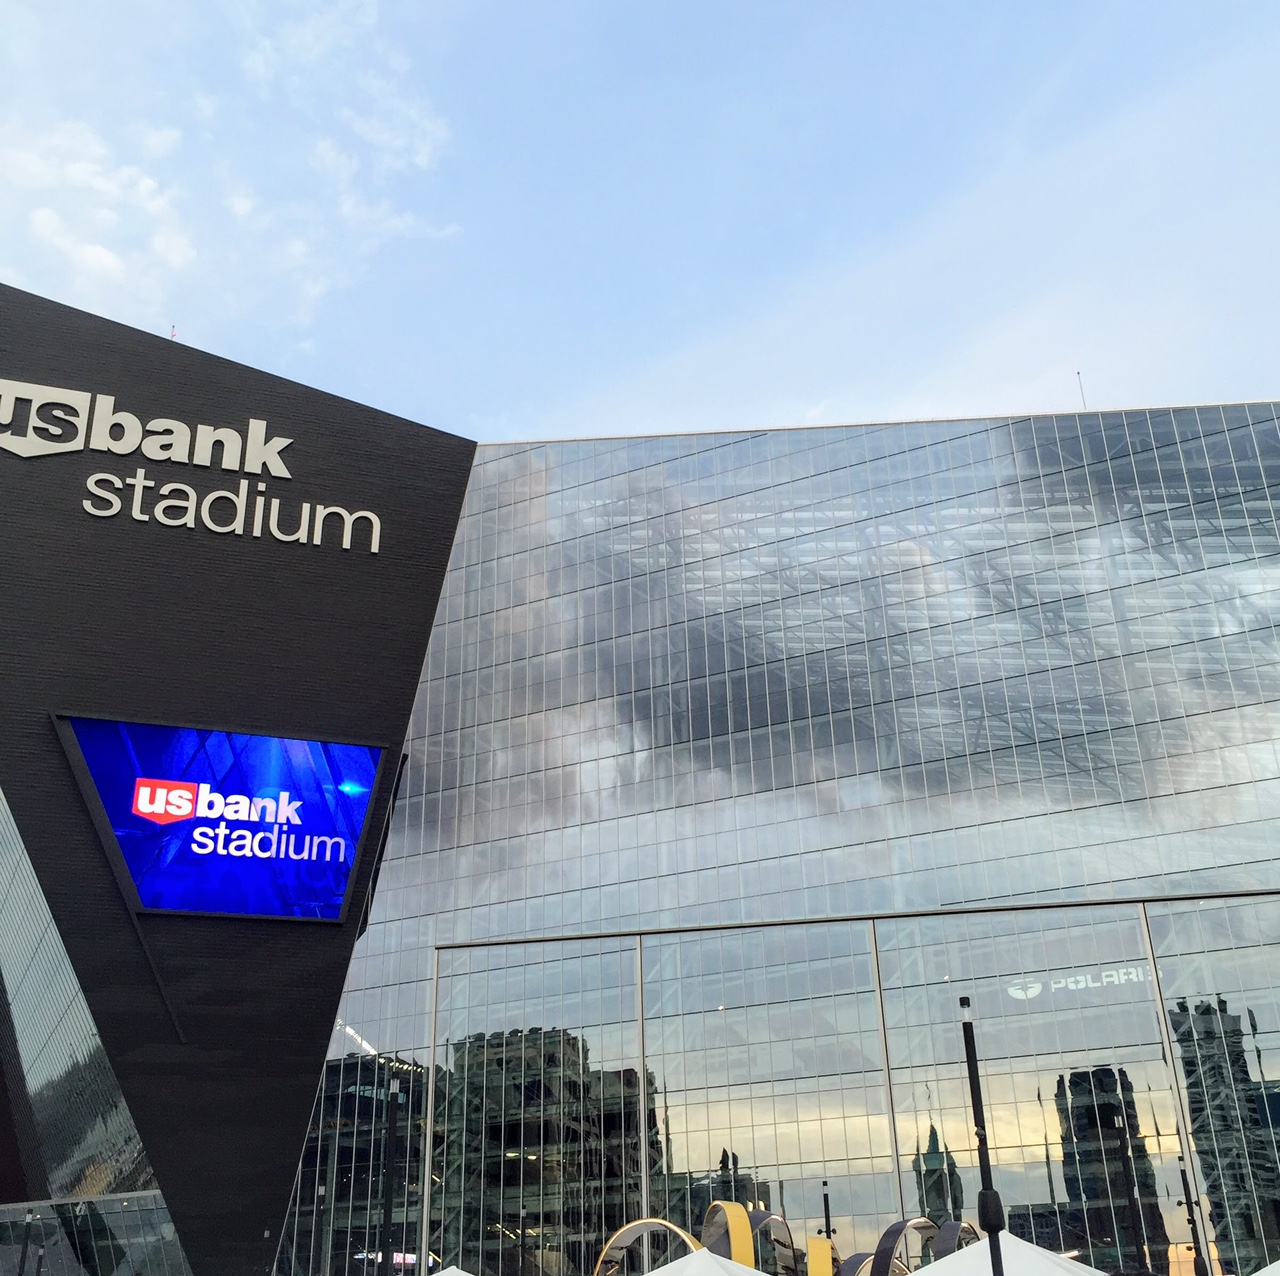 A view of the exterior of U.S. Bank Stadium in August 2016. House Photography file photo